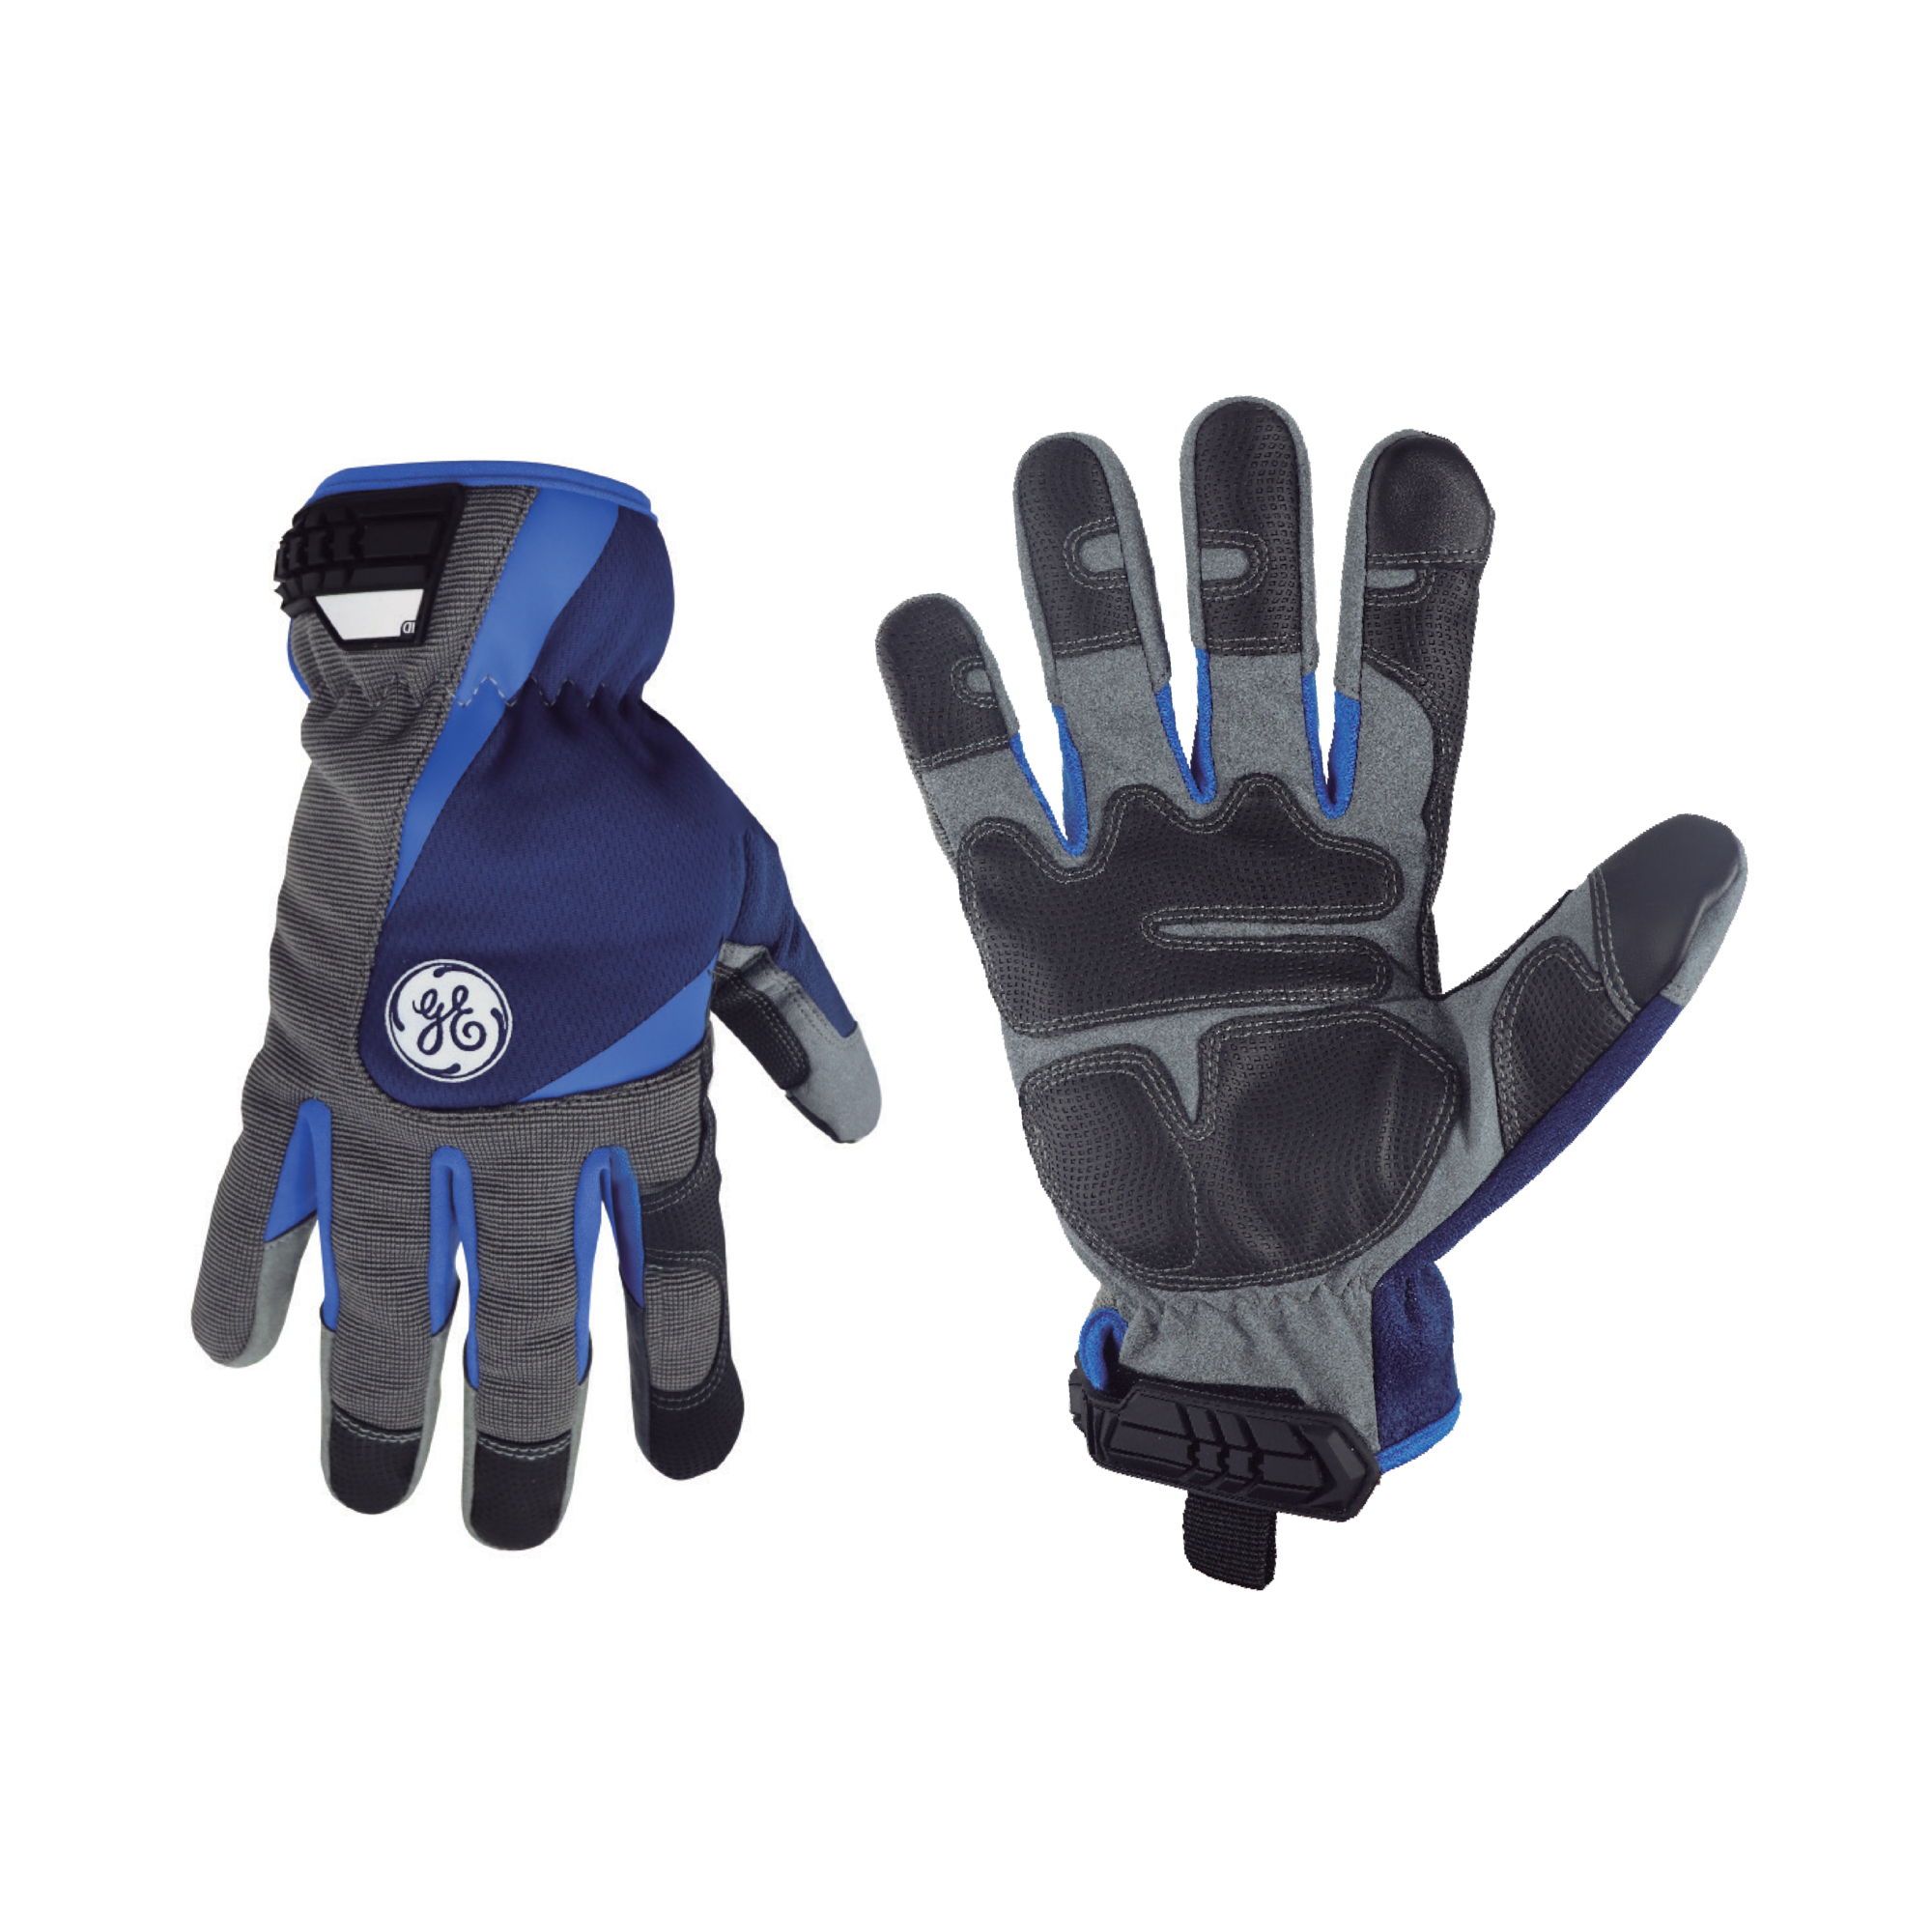 General Electric, Mechanic's Glove Multicolor M 1 pair, Size M, Included (qty.) 1, Model GG411MC